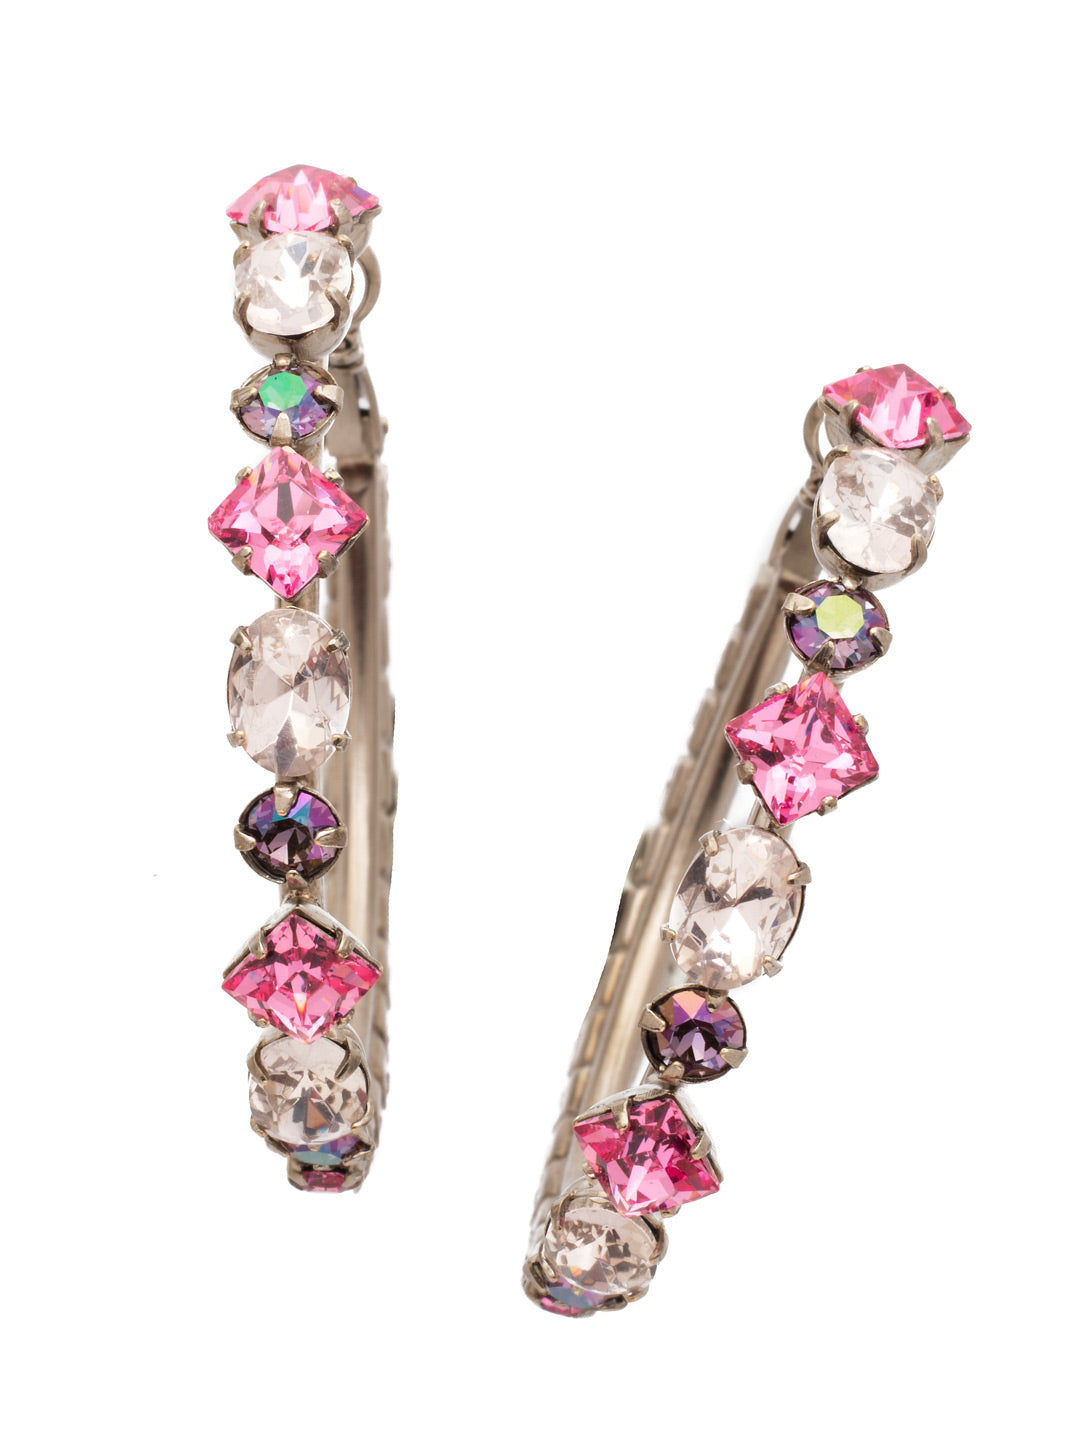 Sicily Hoop Earrings - EEA23ASGAZ - These hoop earrings are packed with sparkle, lined with a beautiful assortment of crystals.